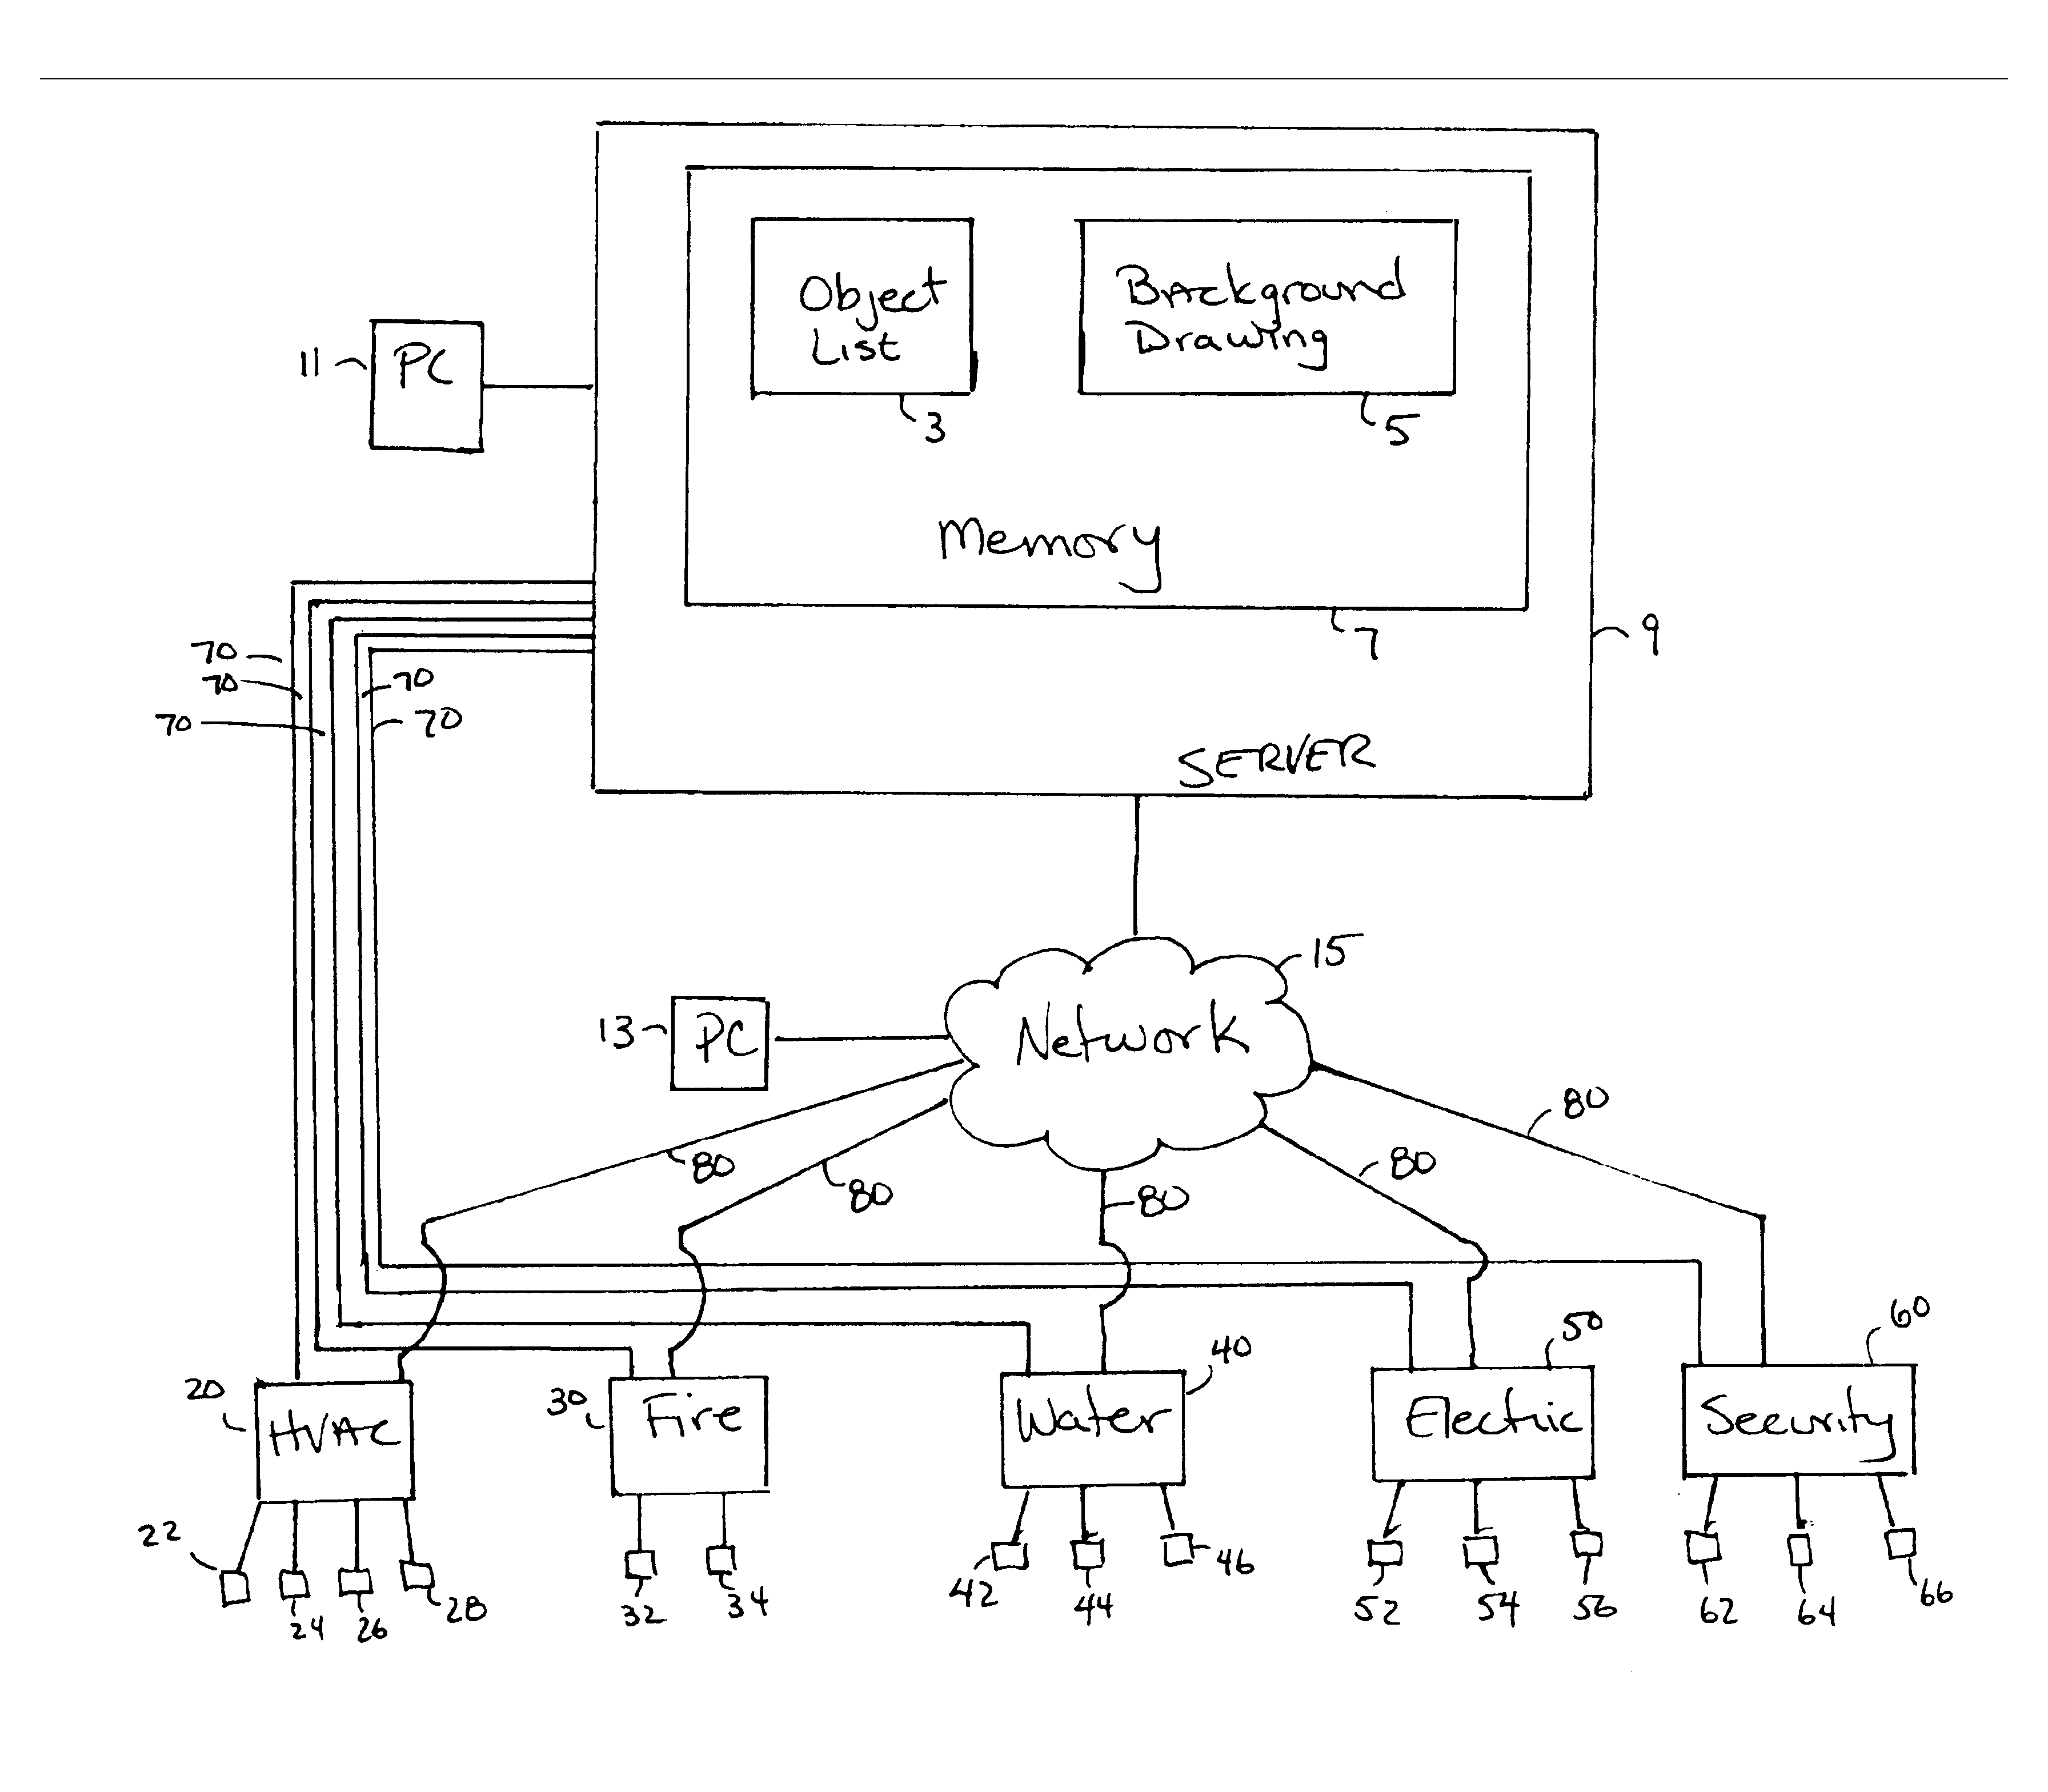 Method and apparatus for automatically generating a SCADA system